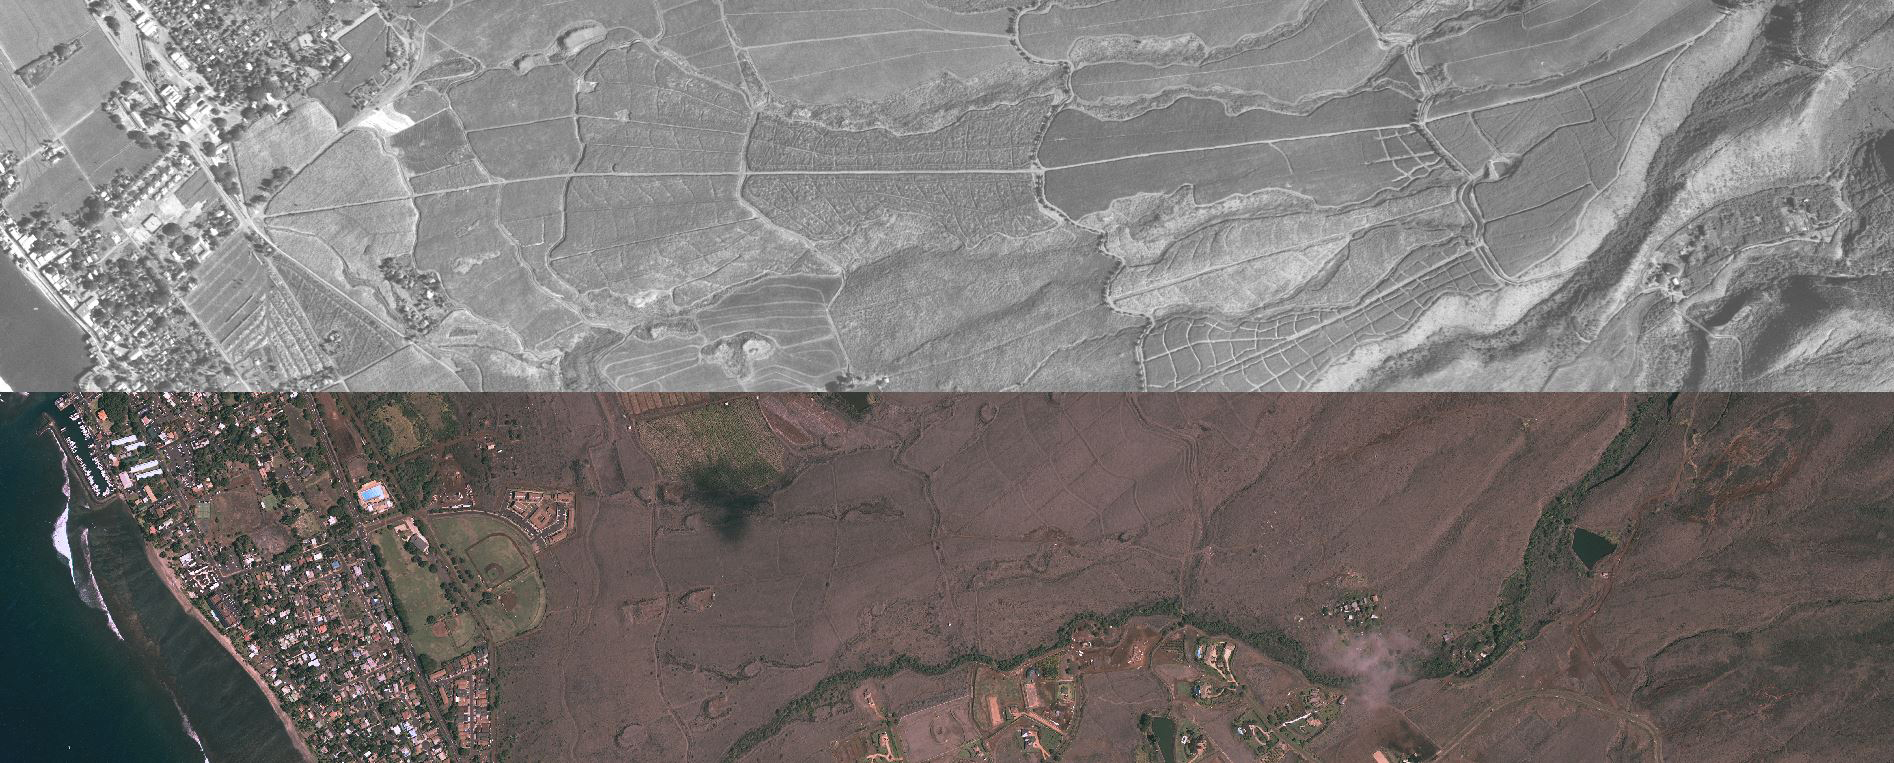 Historical Aerial Imagery of West Maui showing soil erosion